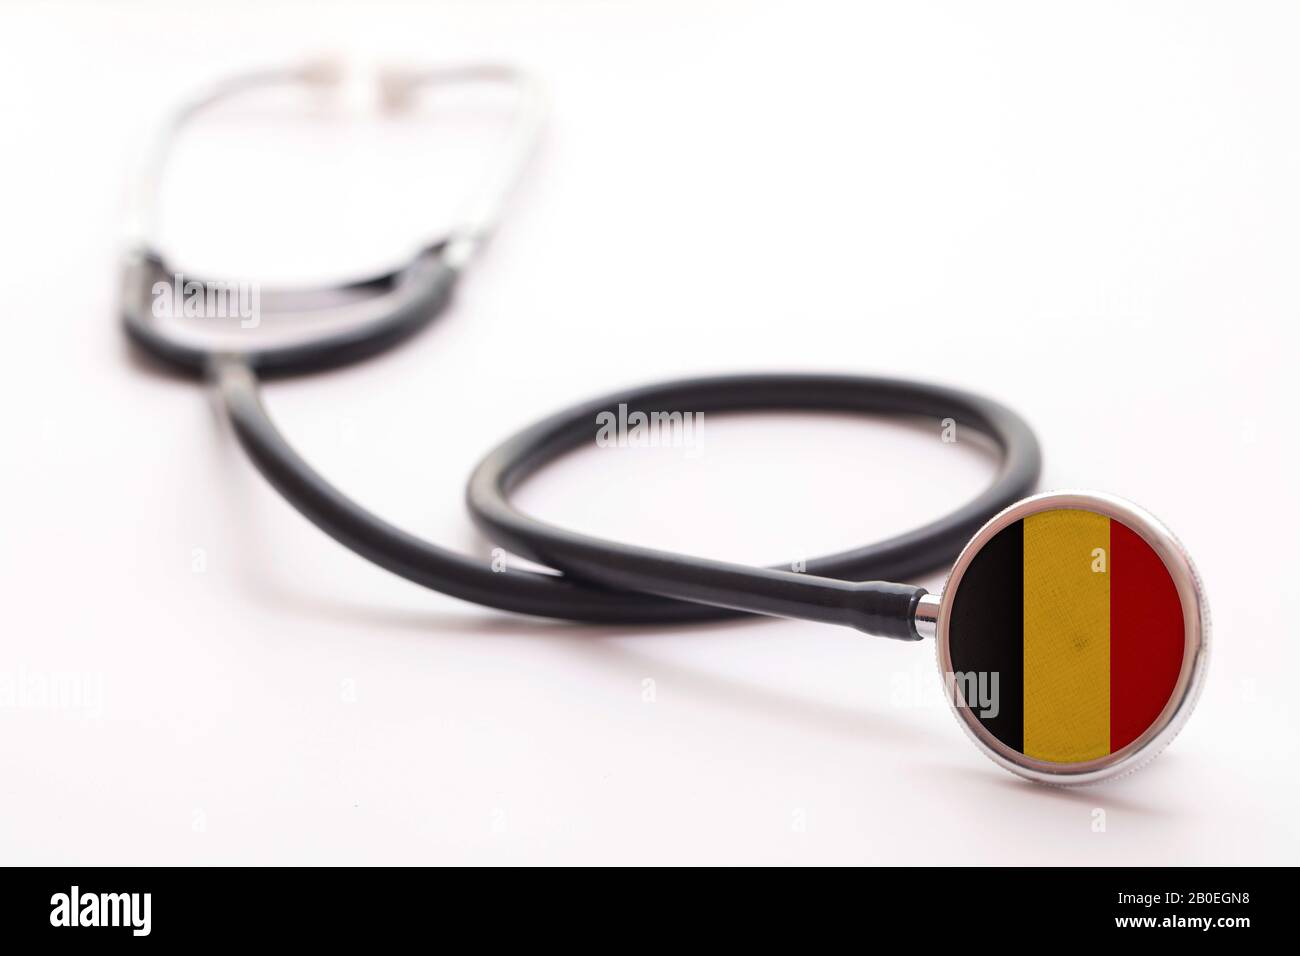 Belgium healthcare concept. Medical stethoscope with country flag Stock Photo